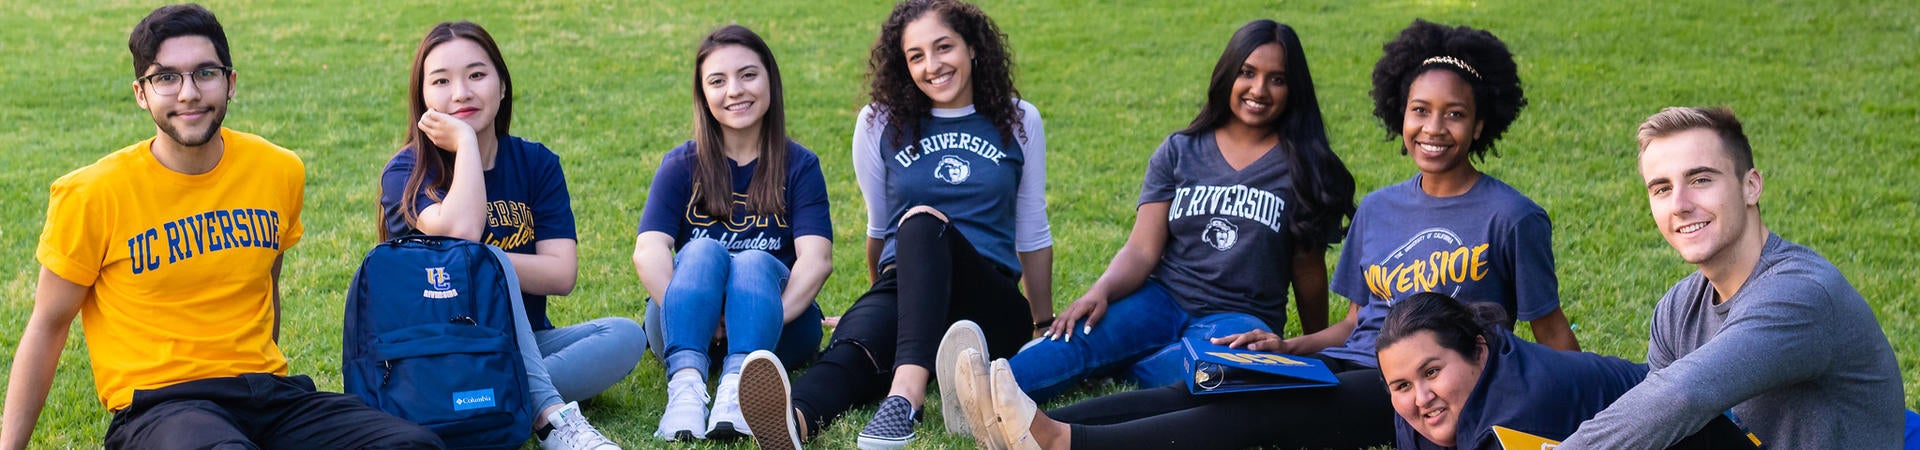 A group of UC Riverside students pose on one of the campus' lawns.